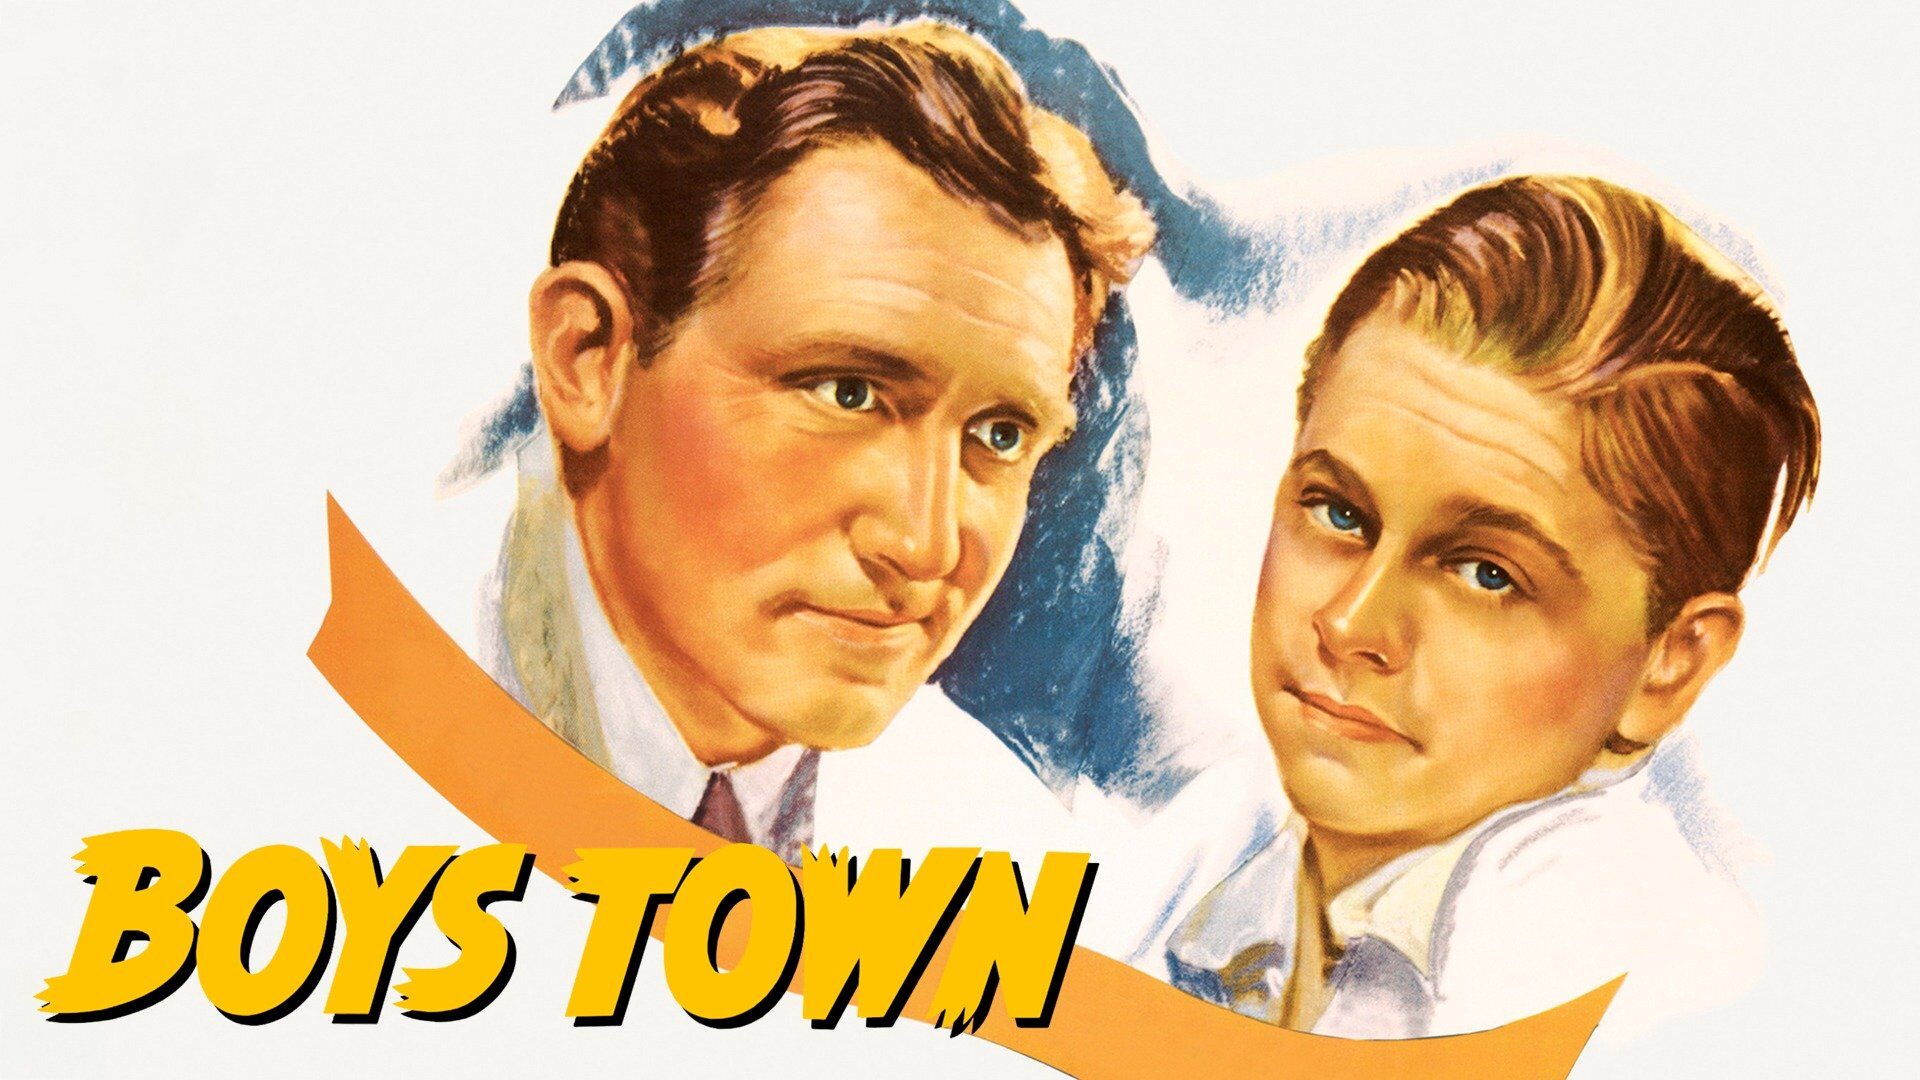 38-facts-about-the-movie-boys-town